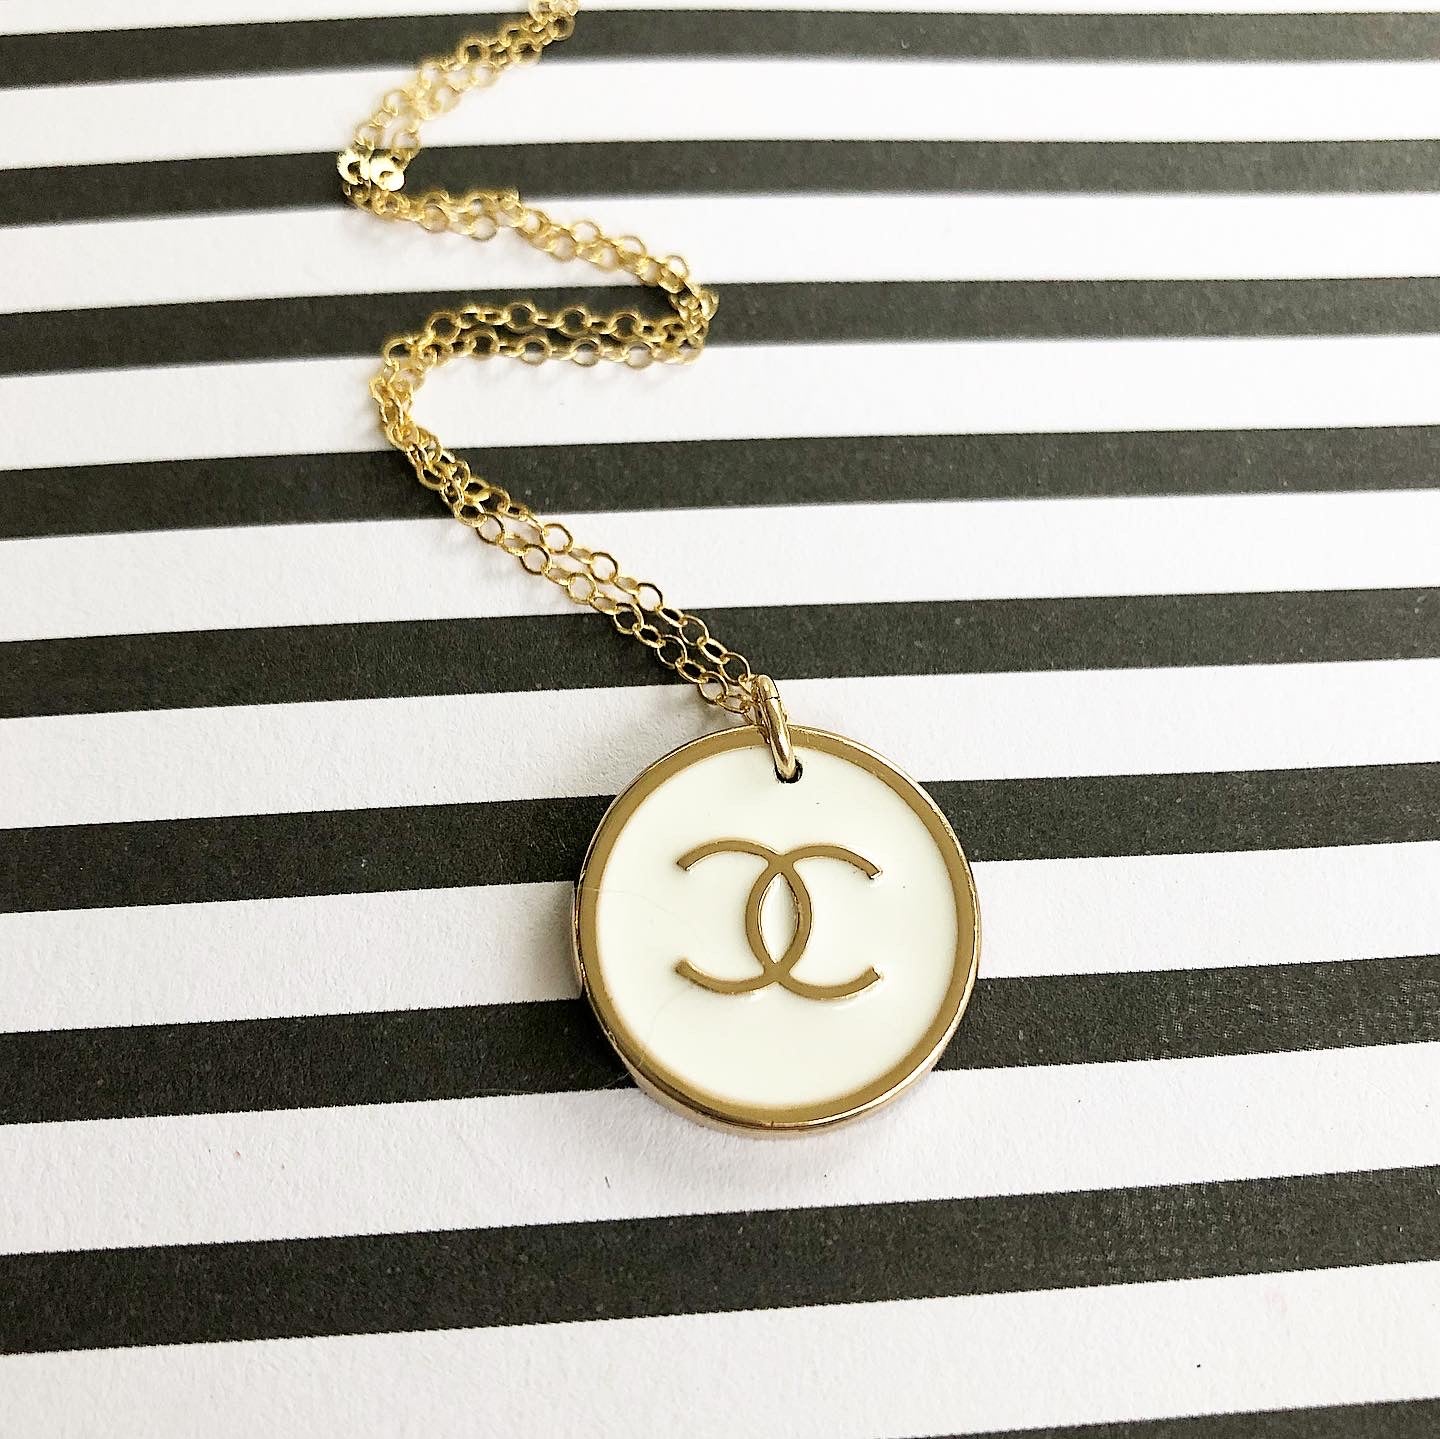 Chanel Matelasse White Gold Quilted Pendant Necklace – Opulent Jewelers